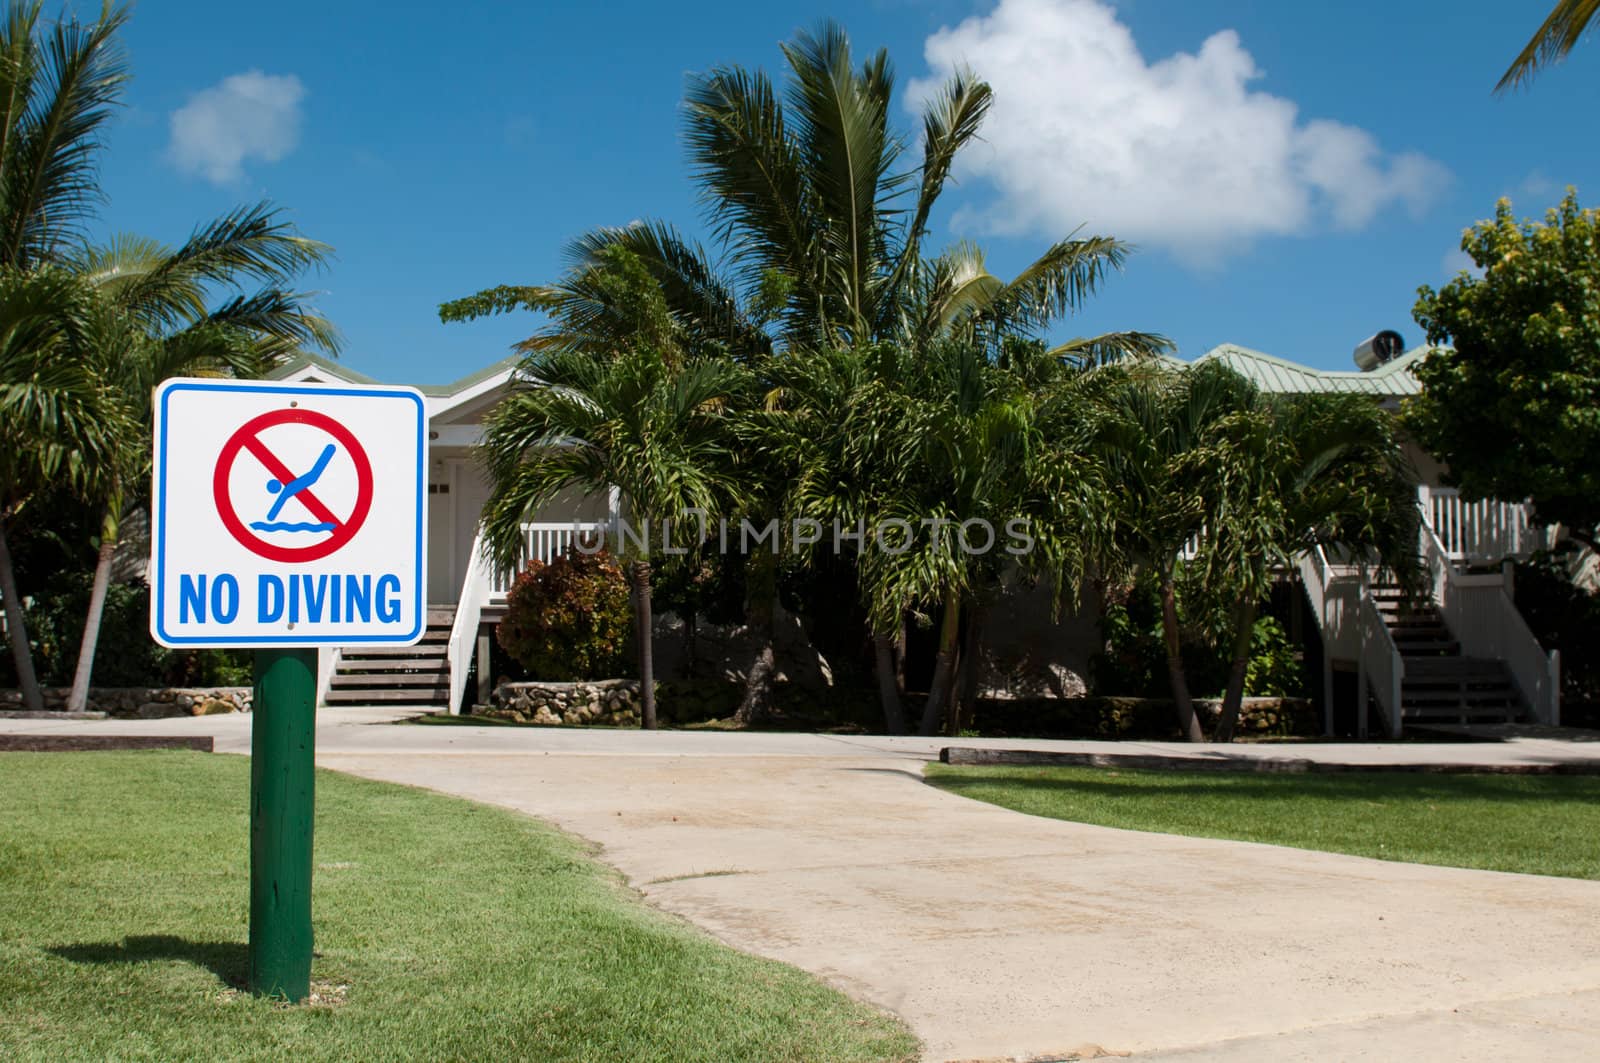 no diving sign on the grass (tropical resort setting with palm trees)